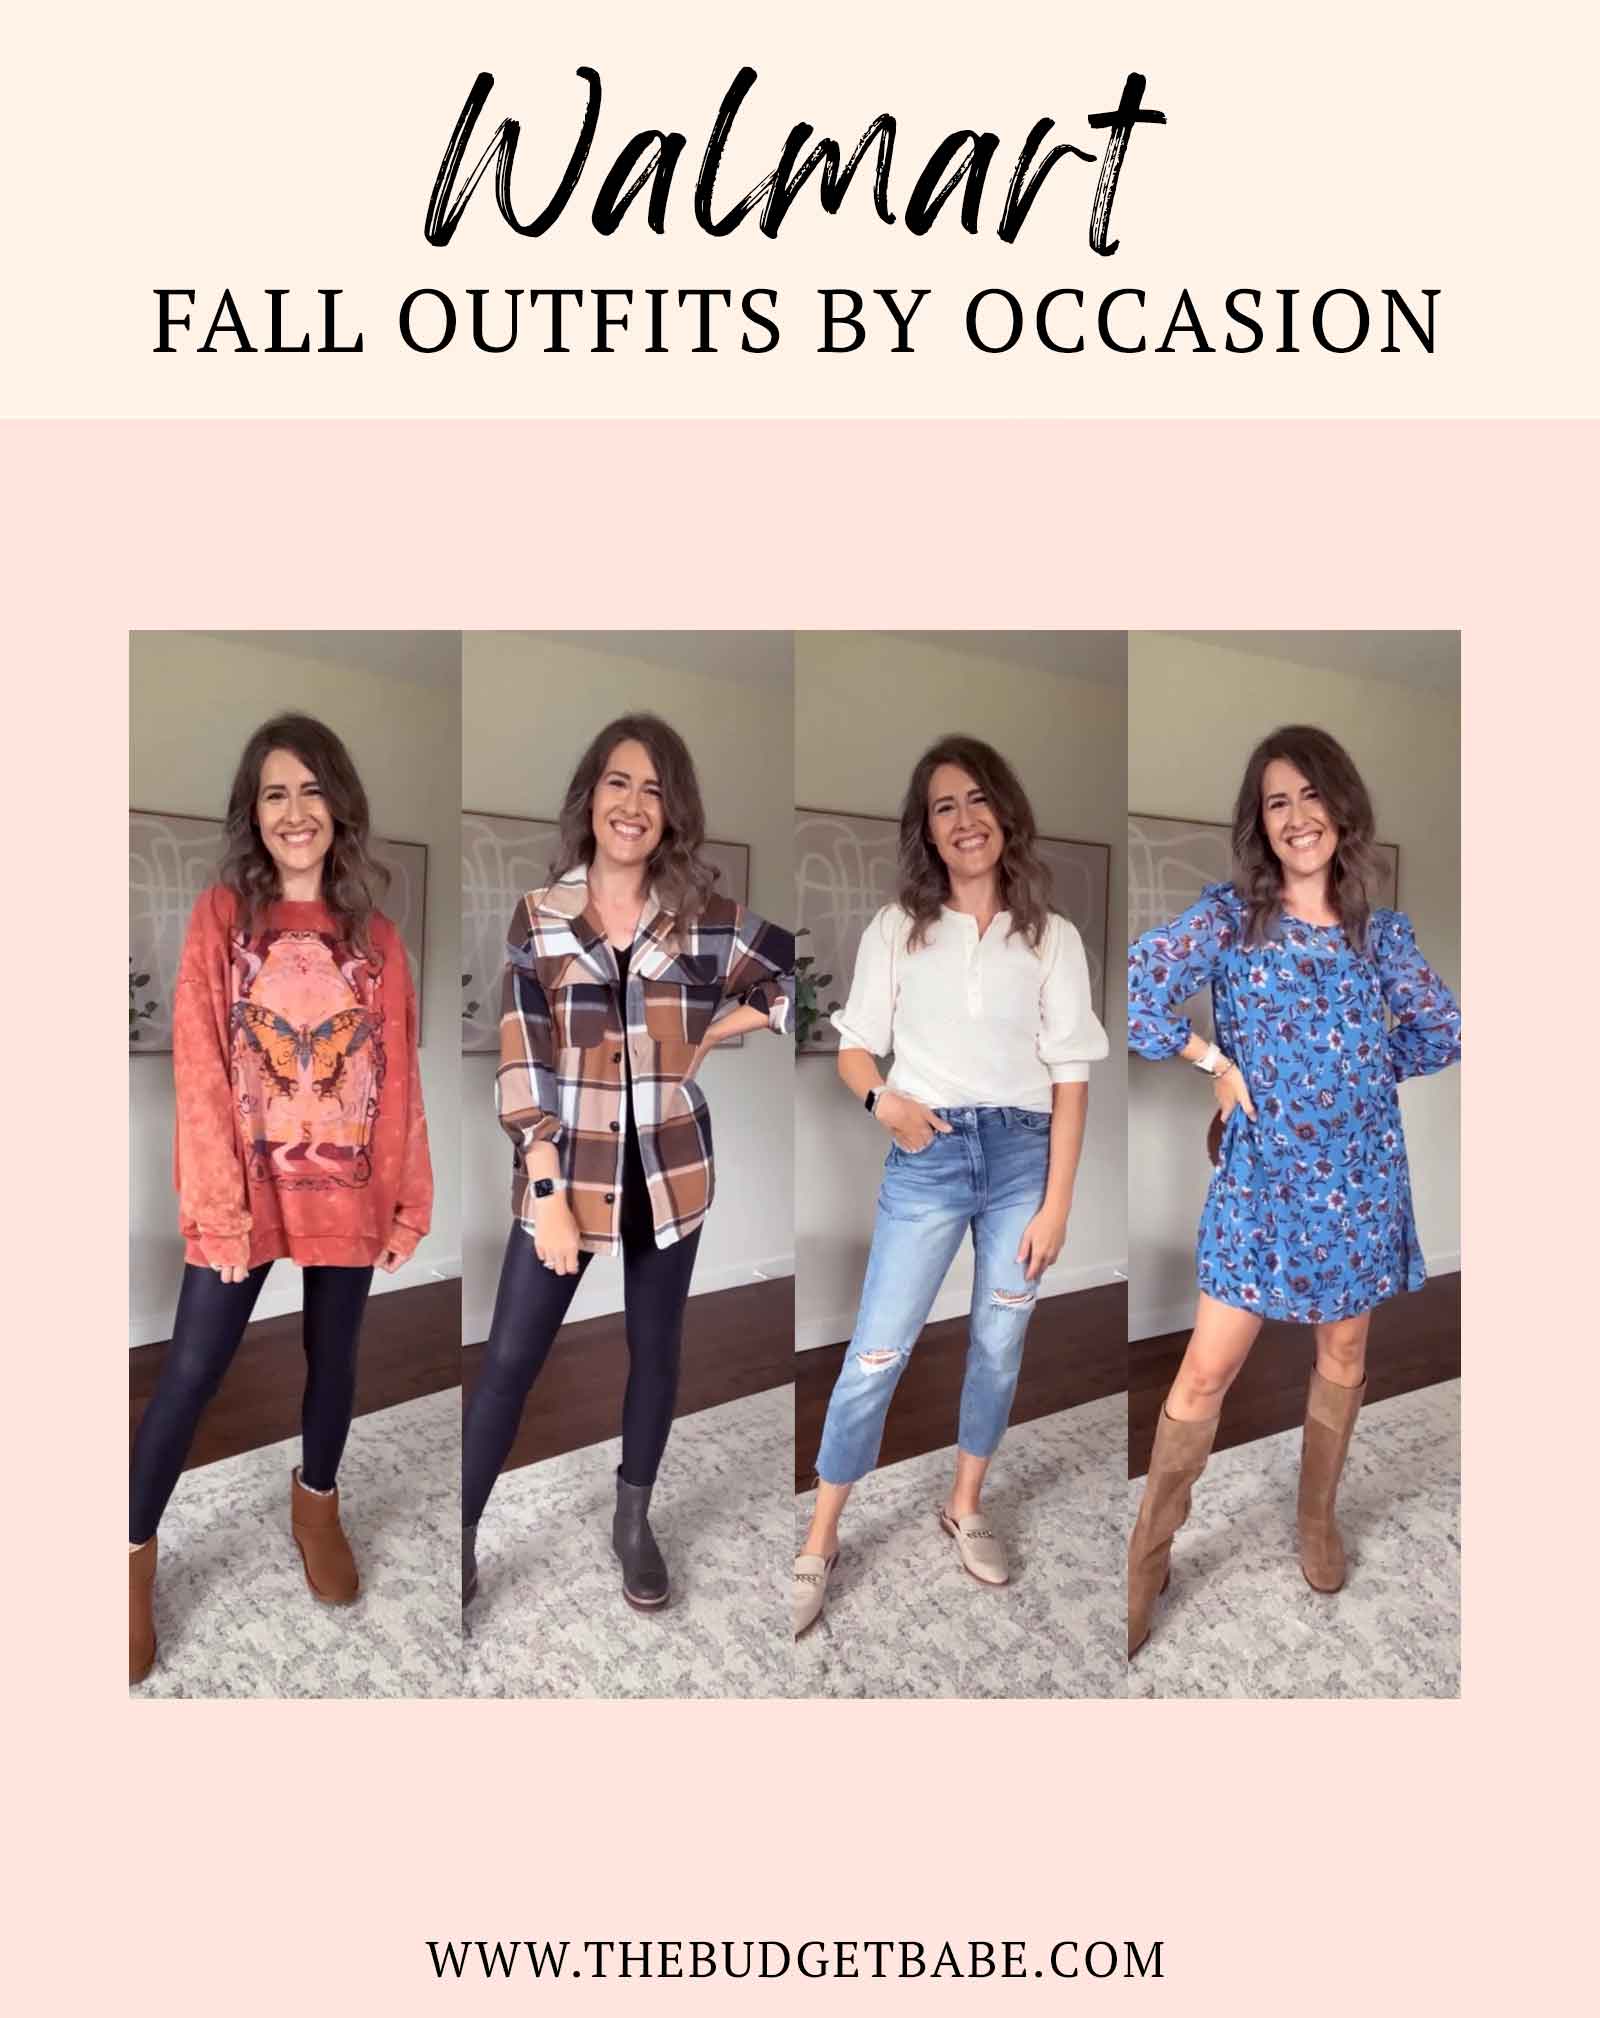 Walmart fall outfits by occasion